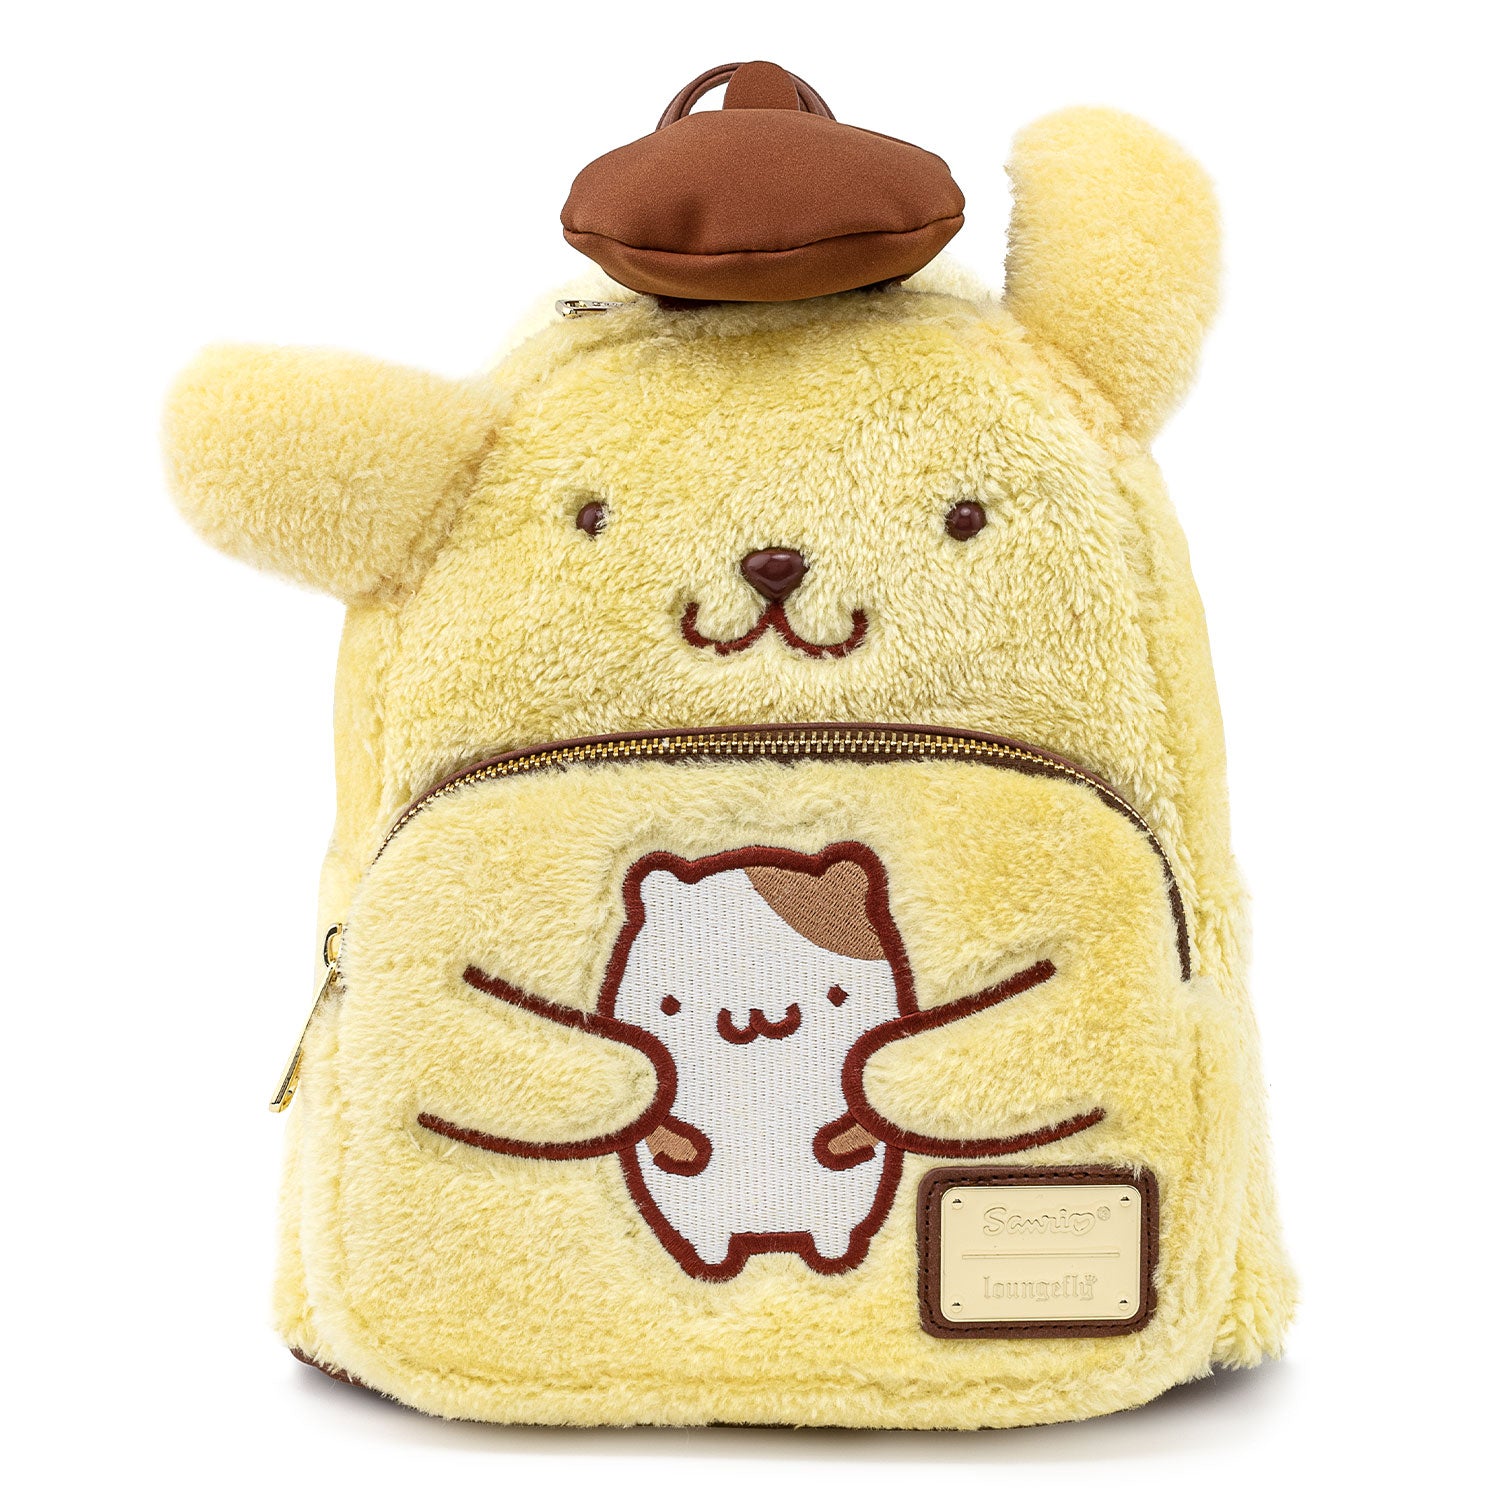 Pompompurin x Loungefly Plush Mini Backpack Bags Loungefly   